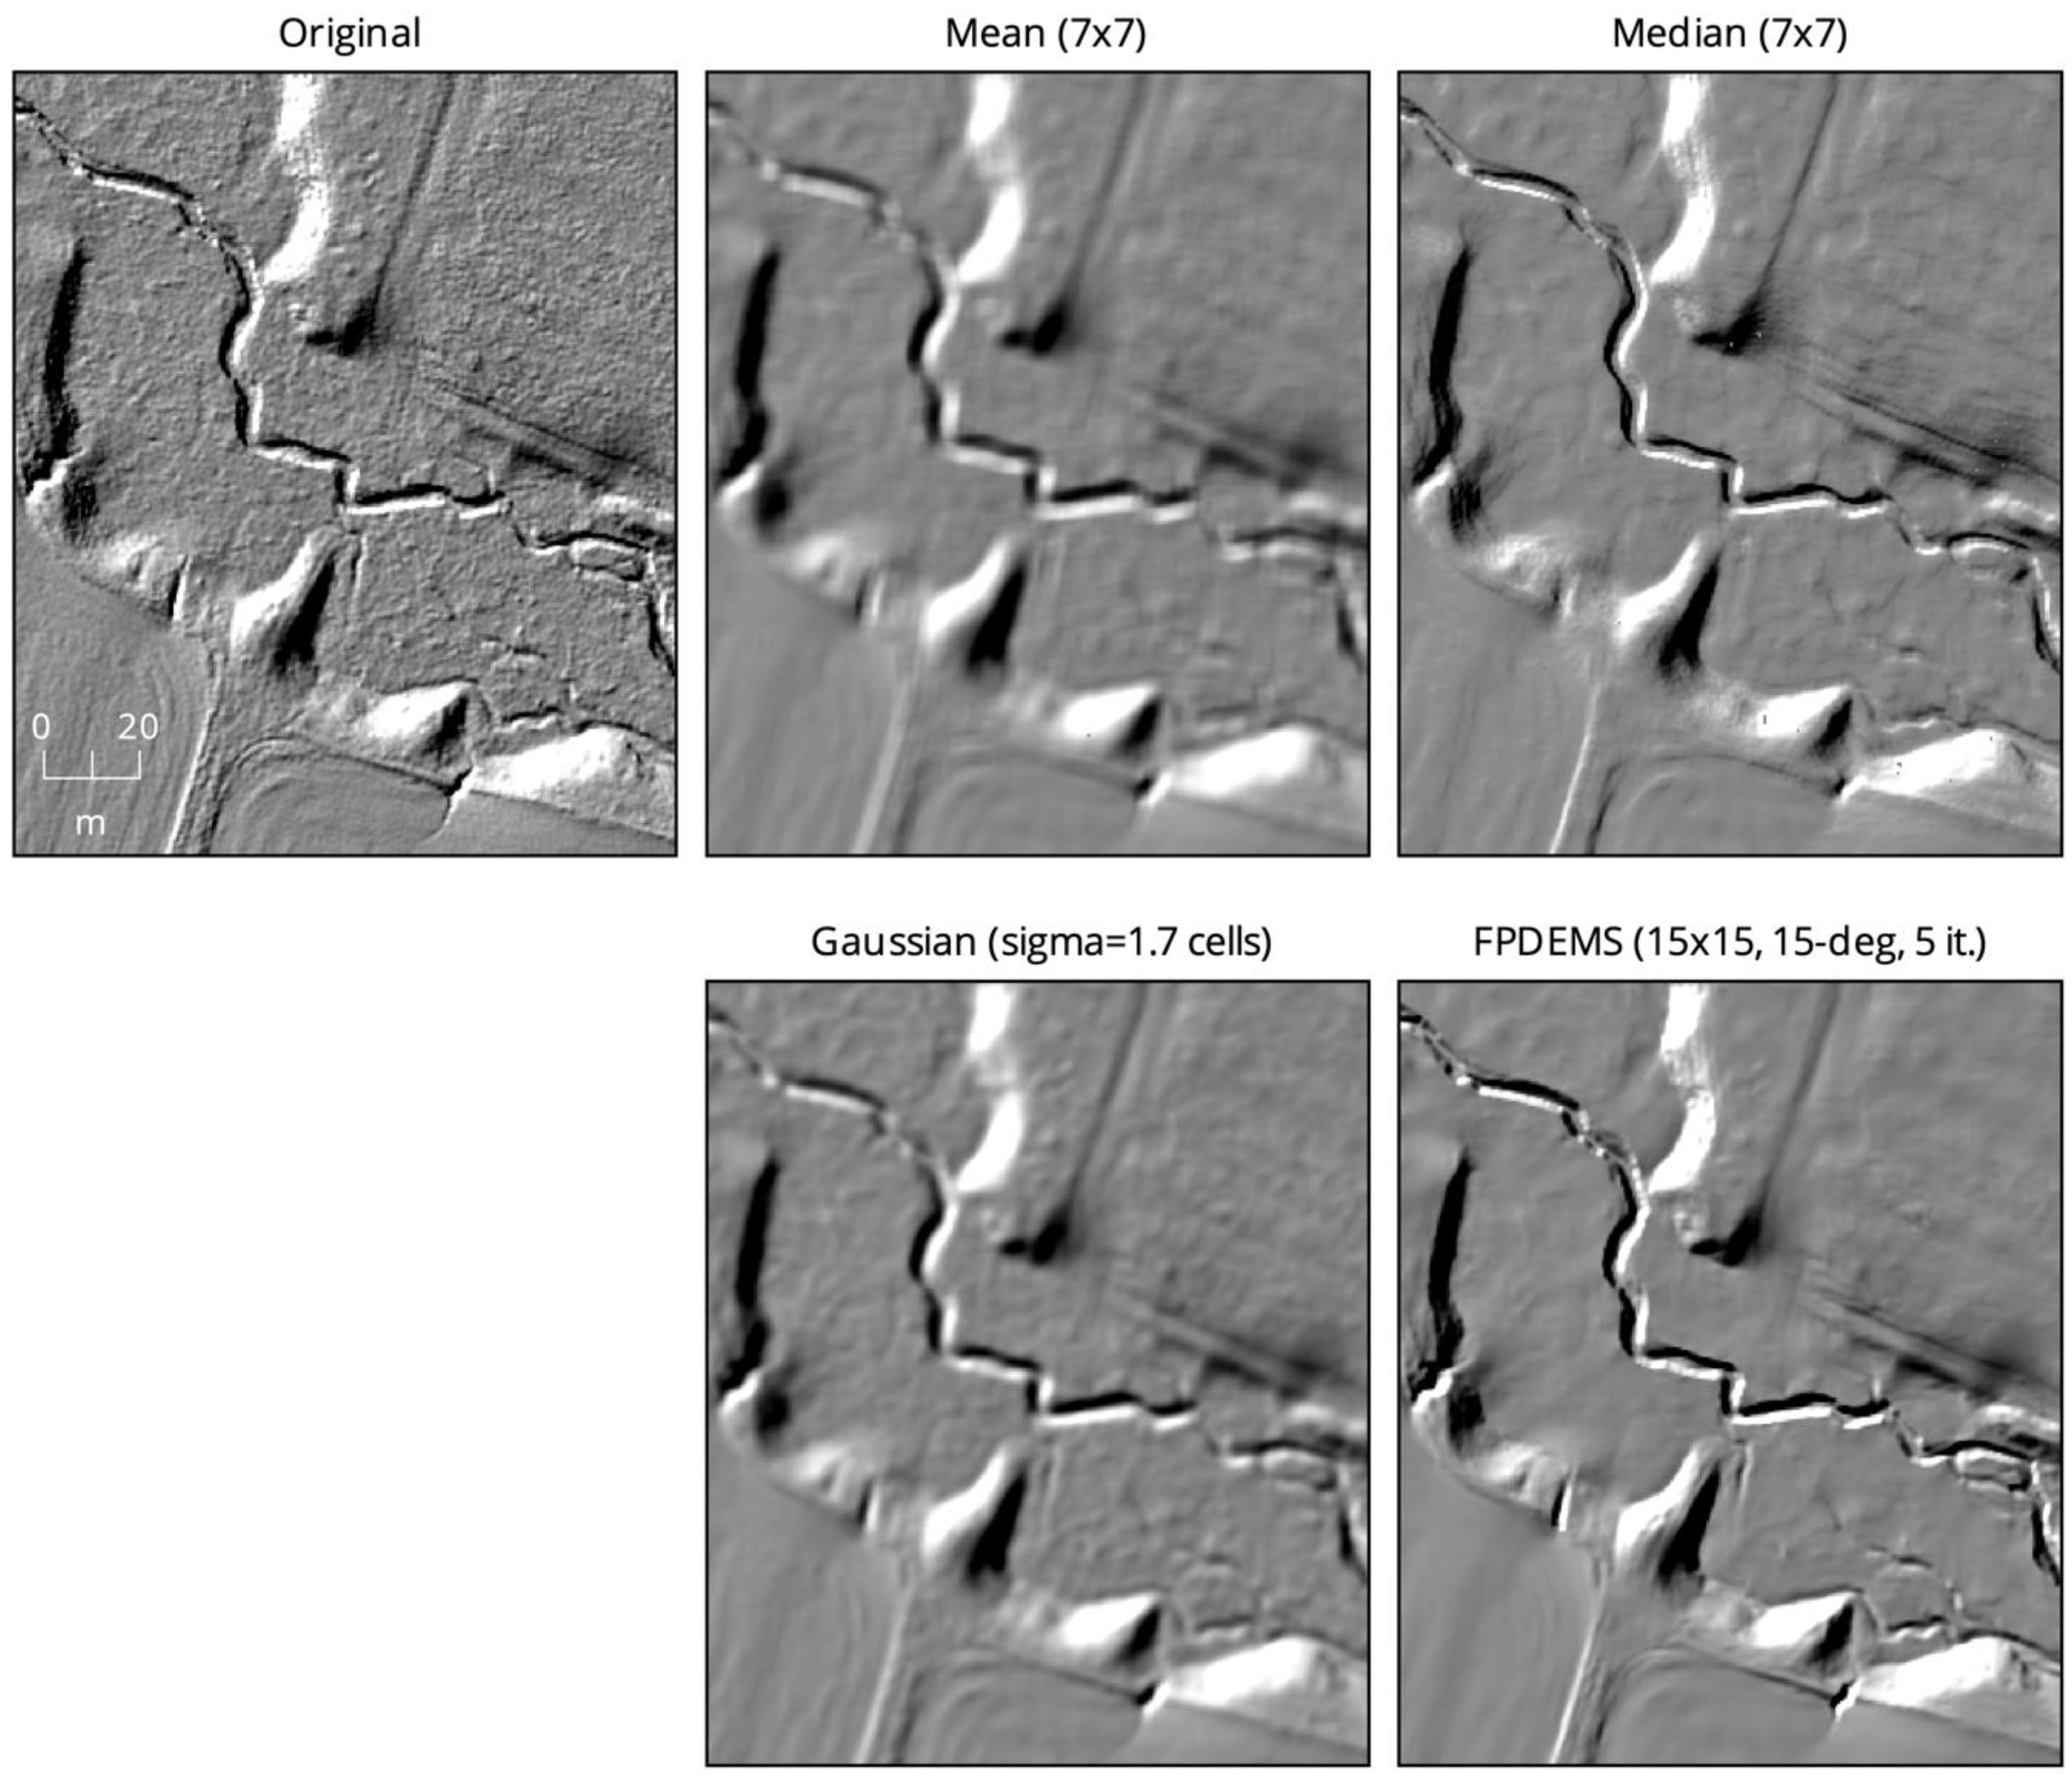 Post hangen blouse Remote Sensing | Free Full-Text | LiDAR DEM Smoothing and the Preservation  of Drainage Features